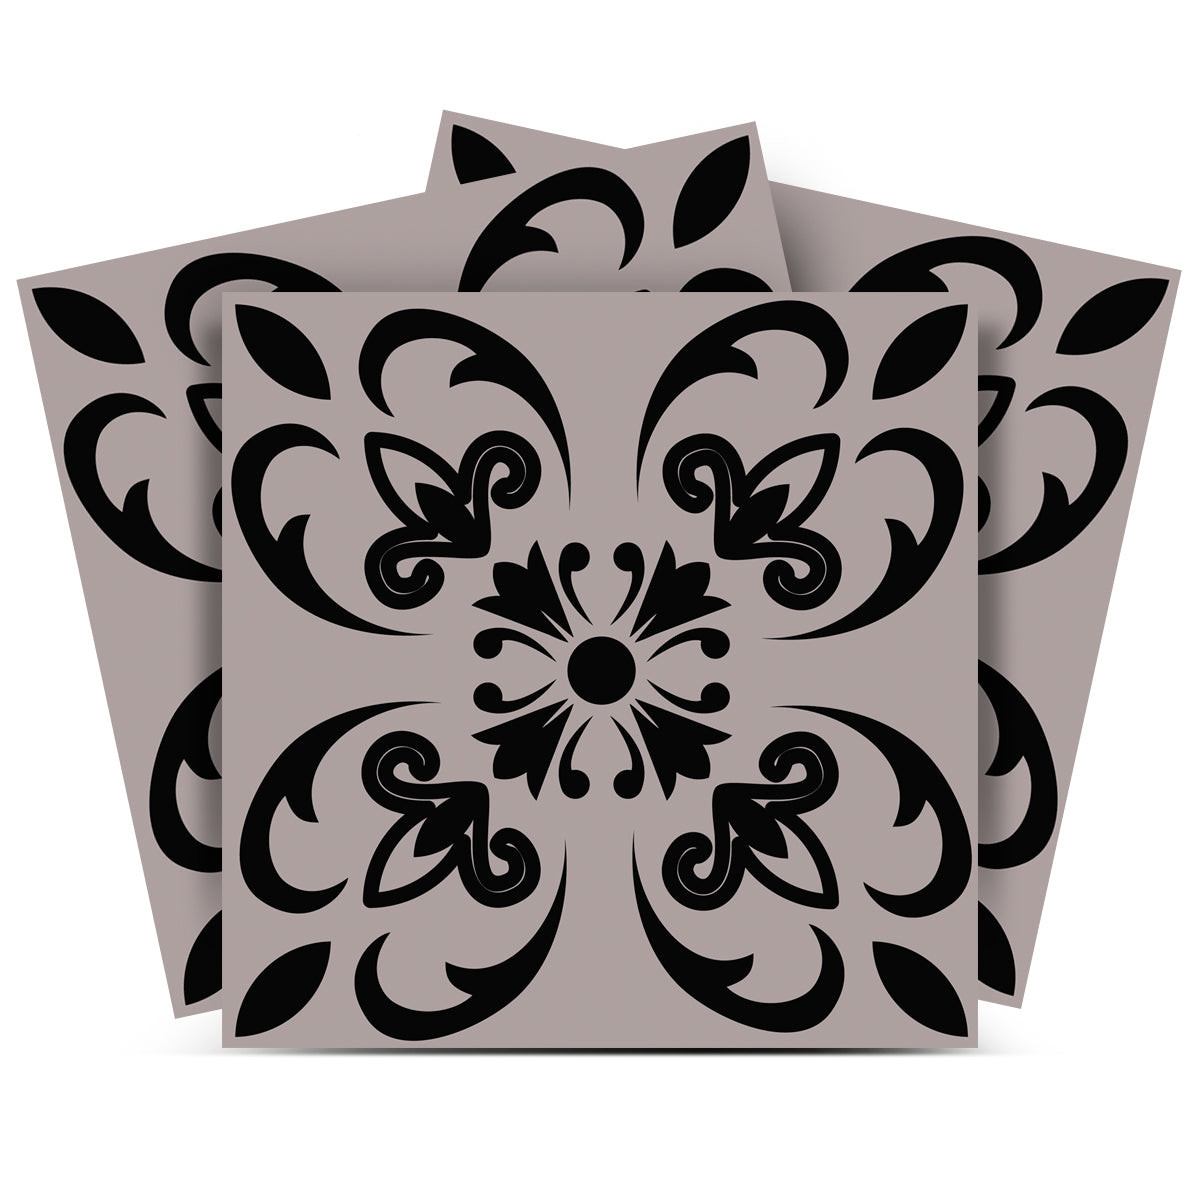 5" X 5" Black And White Orchid Peel And Stick Removable Tiles-390779-1